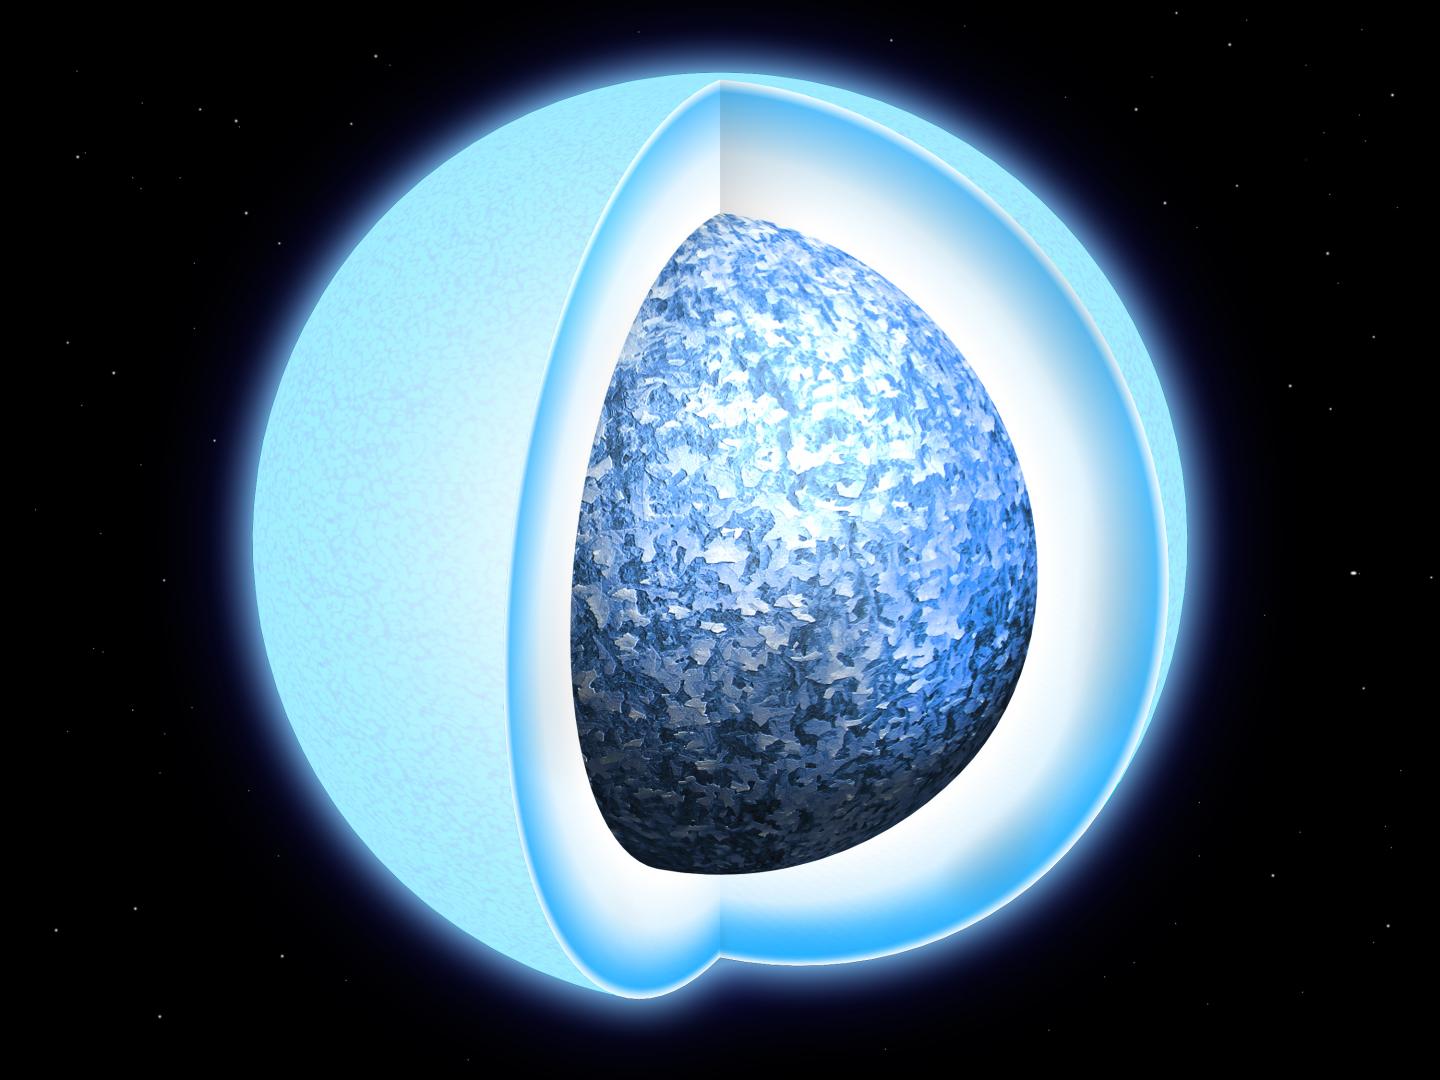 White Dwarf Star in the Process of Solidifying